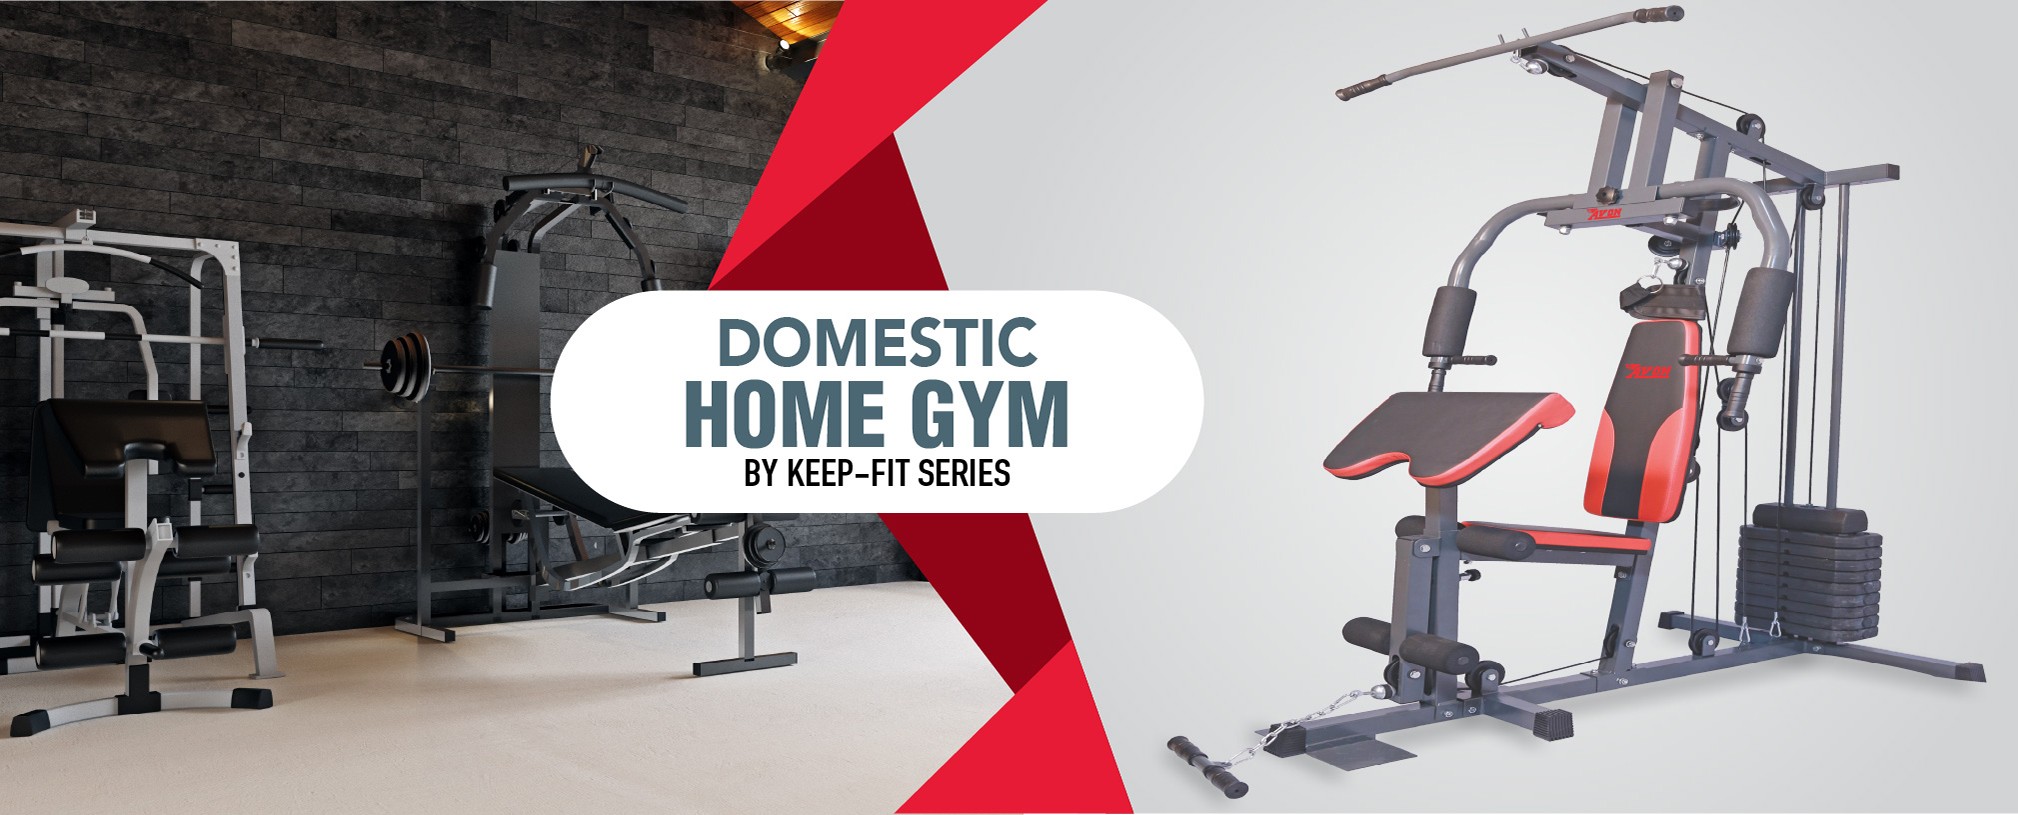 What advantages does home gym fitness equipment offer? Home-gym-machinesT161J03-35-19